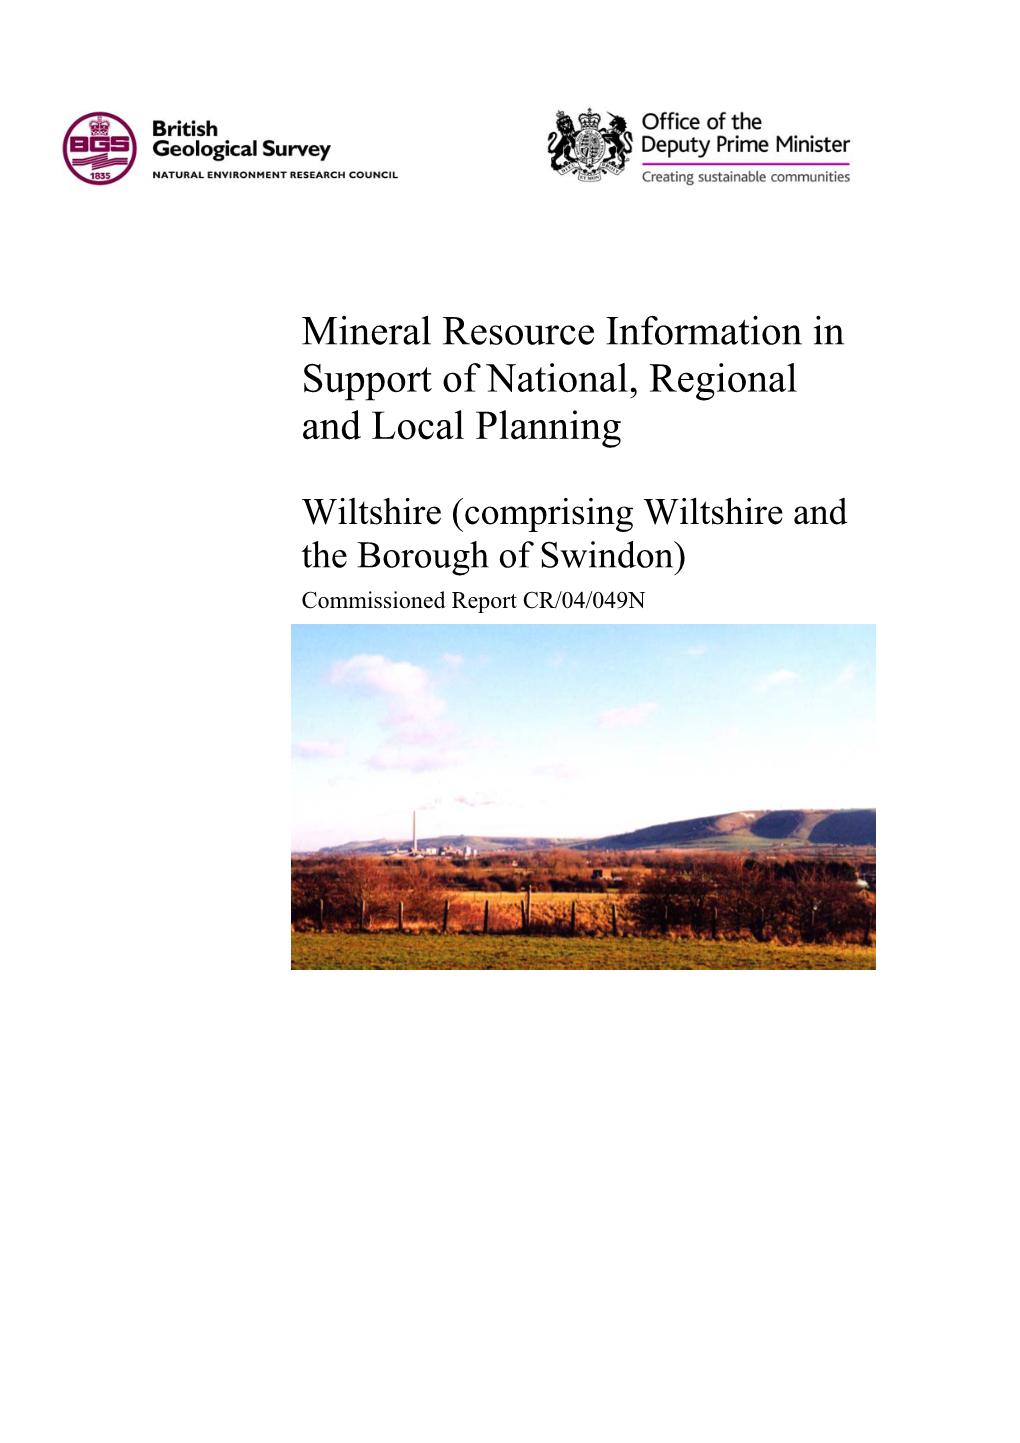 Mineral Resources Report for Wiltshire